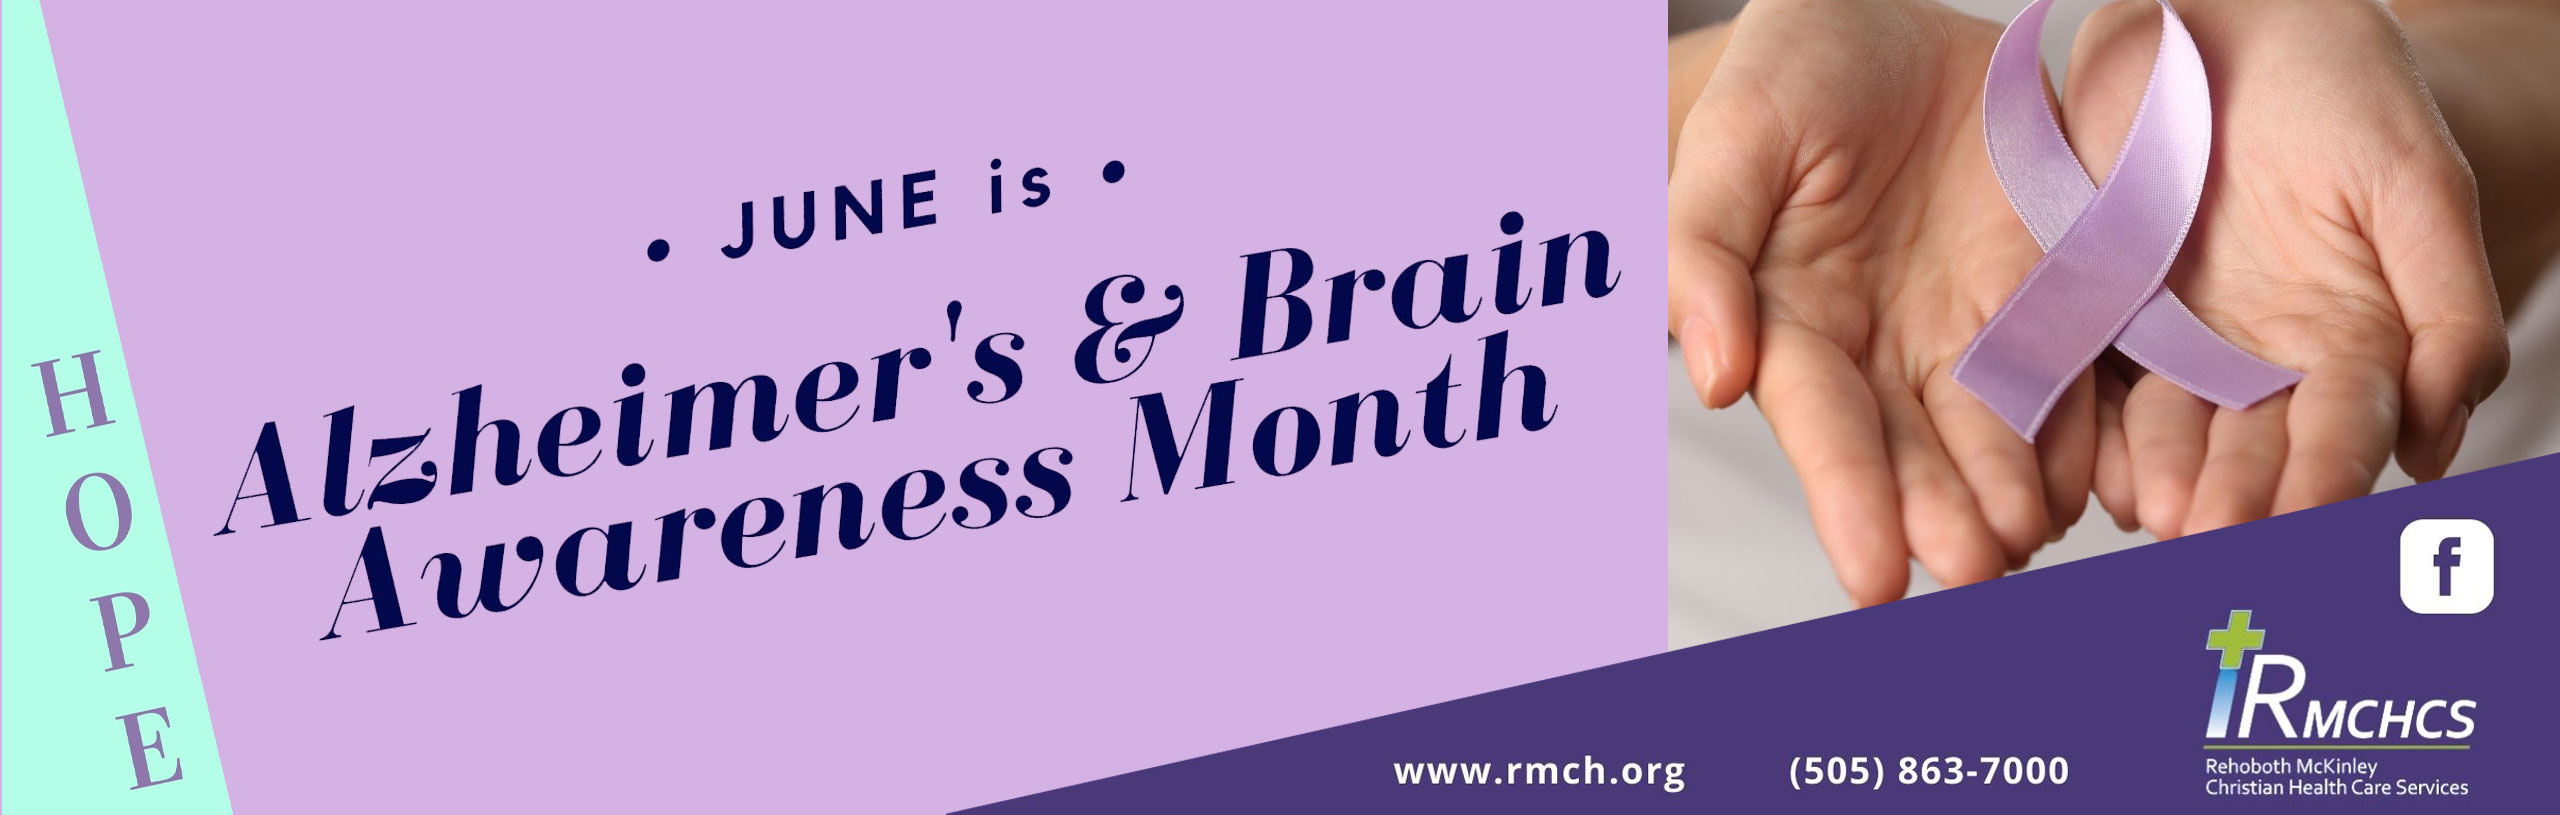 Banner picture that has a woman's hands open while holding a ribbon in honor of Alzheimer's and Brain Awareness Month. Banner says:

* JUNE is*
Alzheimer's & Brain Awareness Month

H O P E 

www.rmch.org
(505) 863-7000

RMCHCS
Rehoboth Mckinley Christian Health Services
(f) <- Facebook Logo